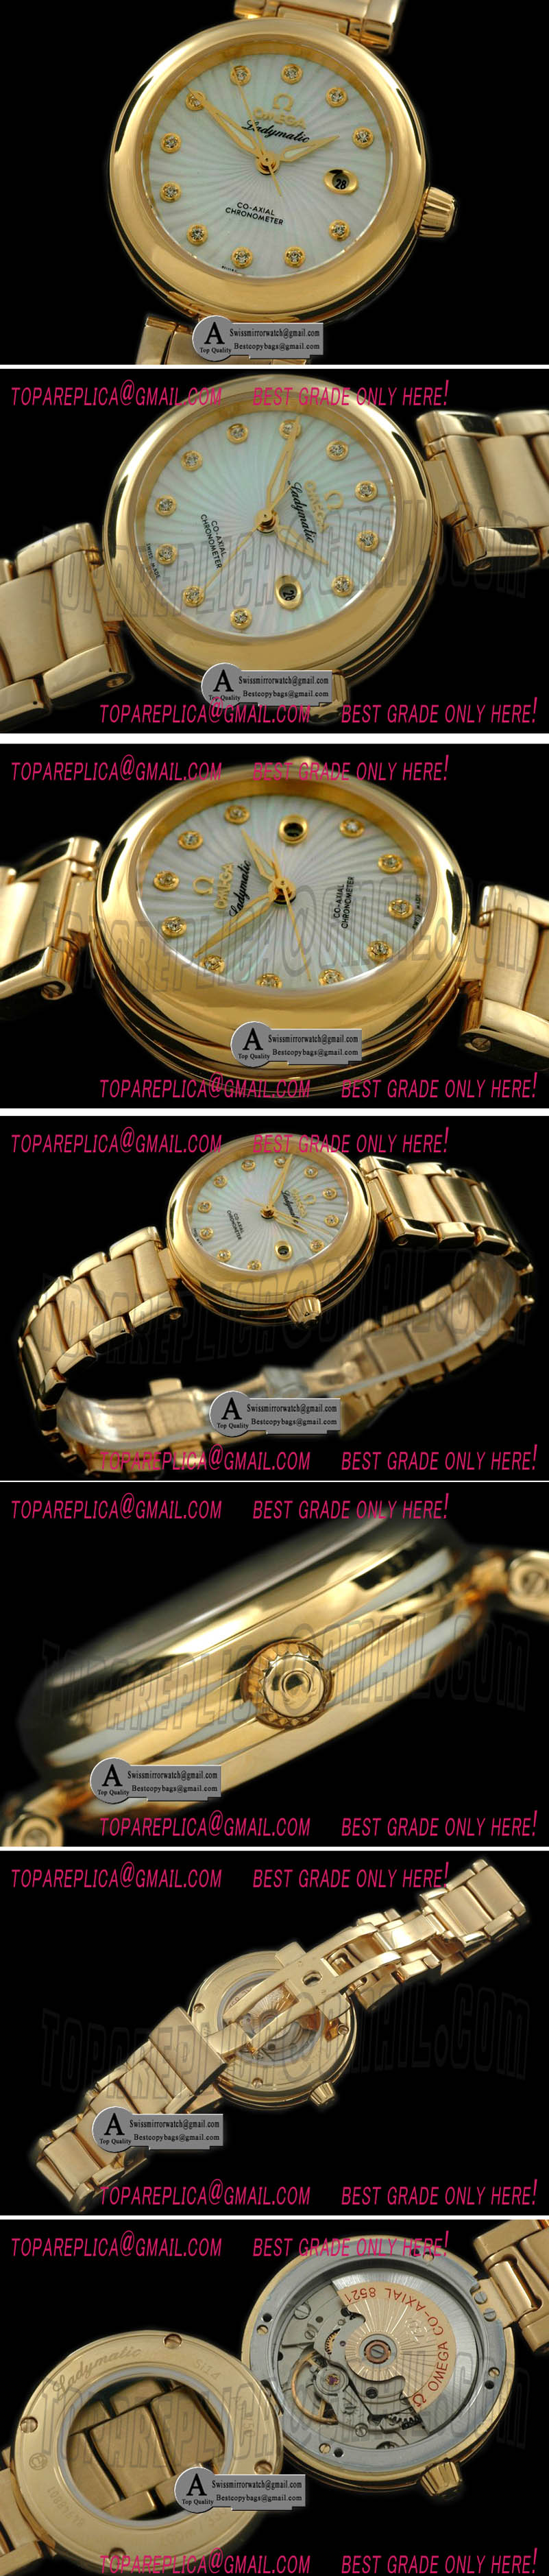 Omega 425.60.34.20.55.002 Deville Ladymatic Mid Yellow Gold/Yellow Gold White A-2836 Replica Watches